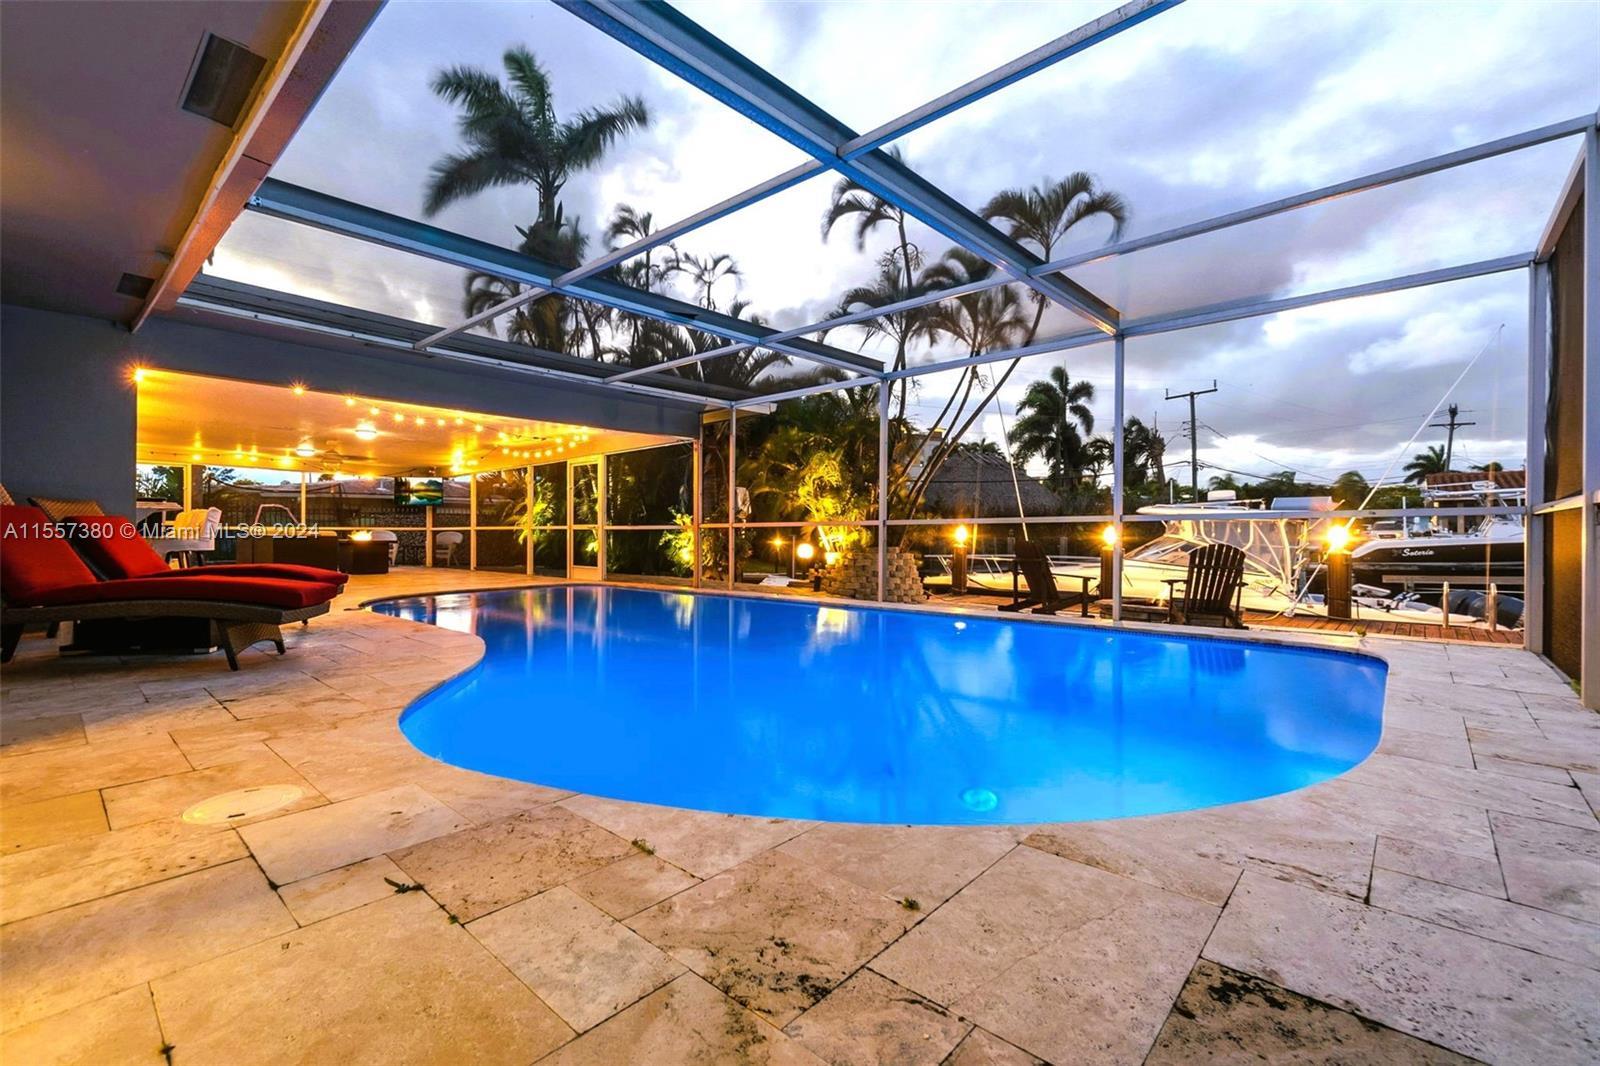 South Florida living at its finest with this stunning 3 bed 3 bath pool homel with 75' dock and dire